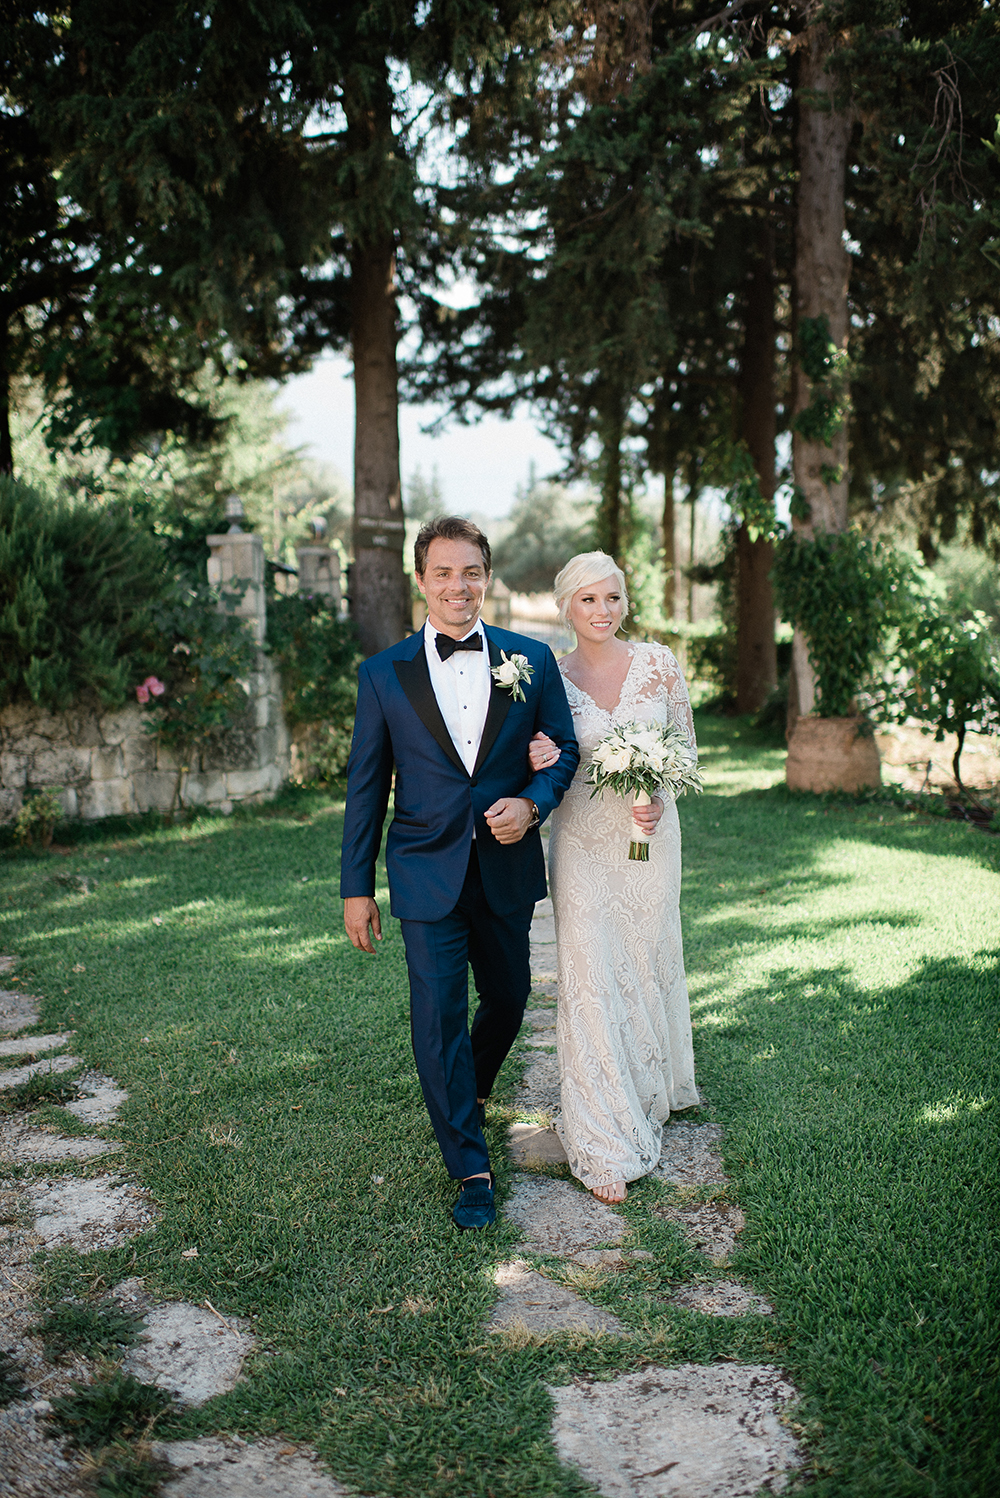 walking down the aisle - greece - elopement - outdoor - wedding ceremony